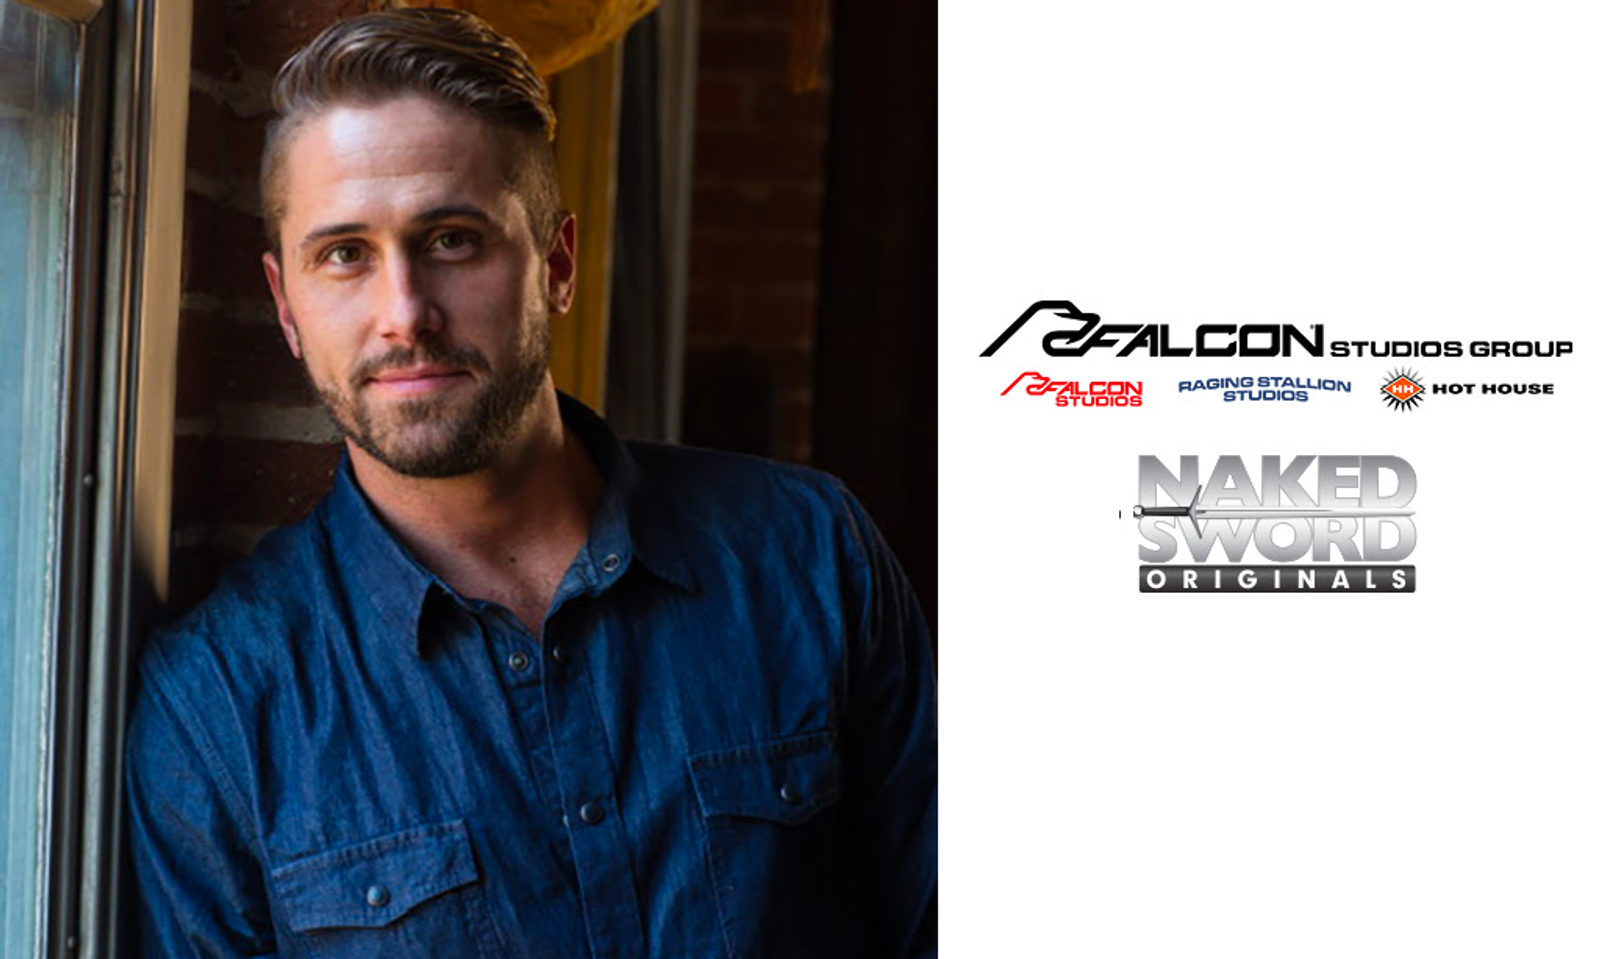 Falcon/NakedSword Hires Wesley Woods